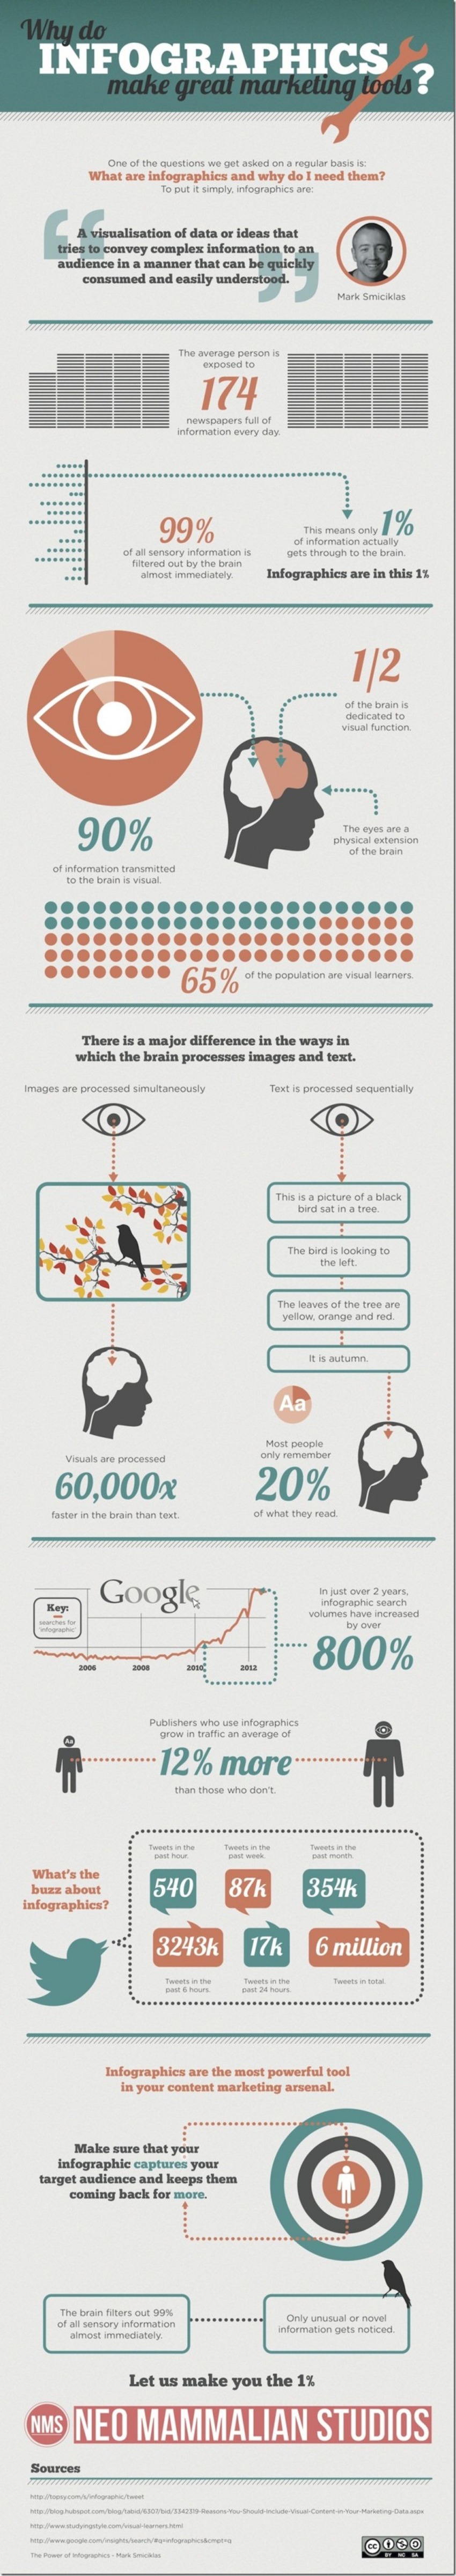 Infographic: Why Infographics Make Great Marketing Tools | The MarTech Digest | Scoop.it